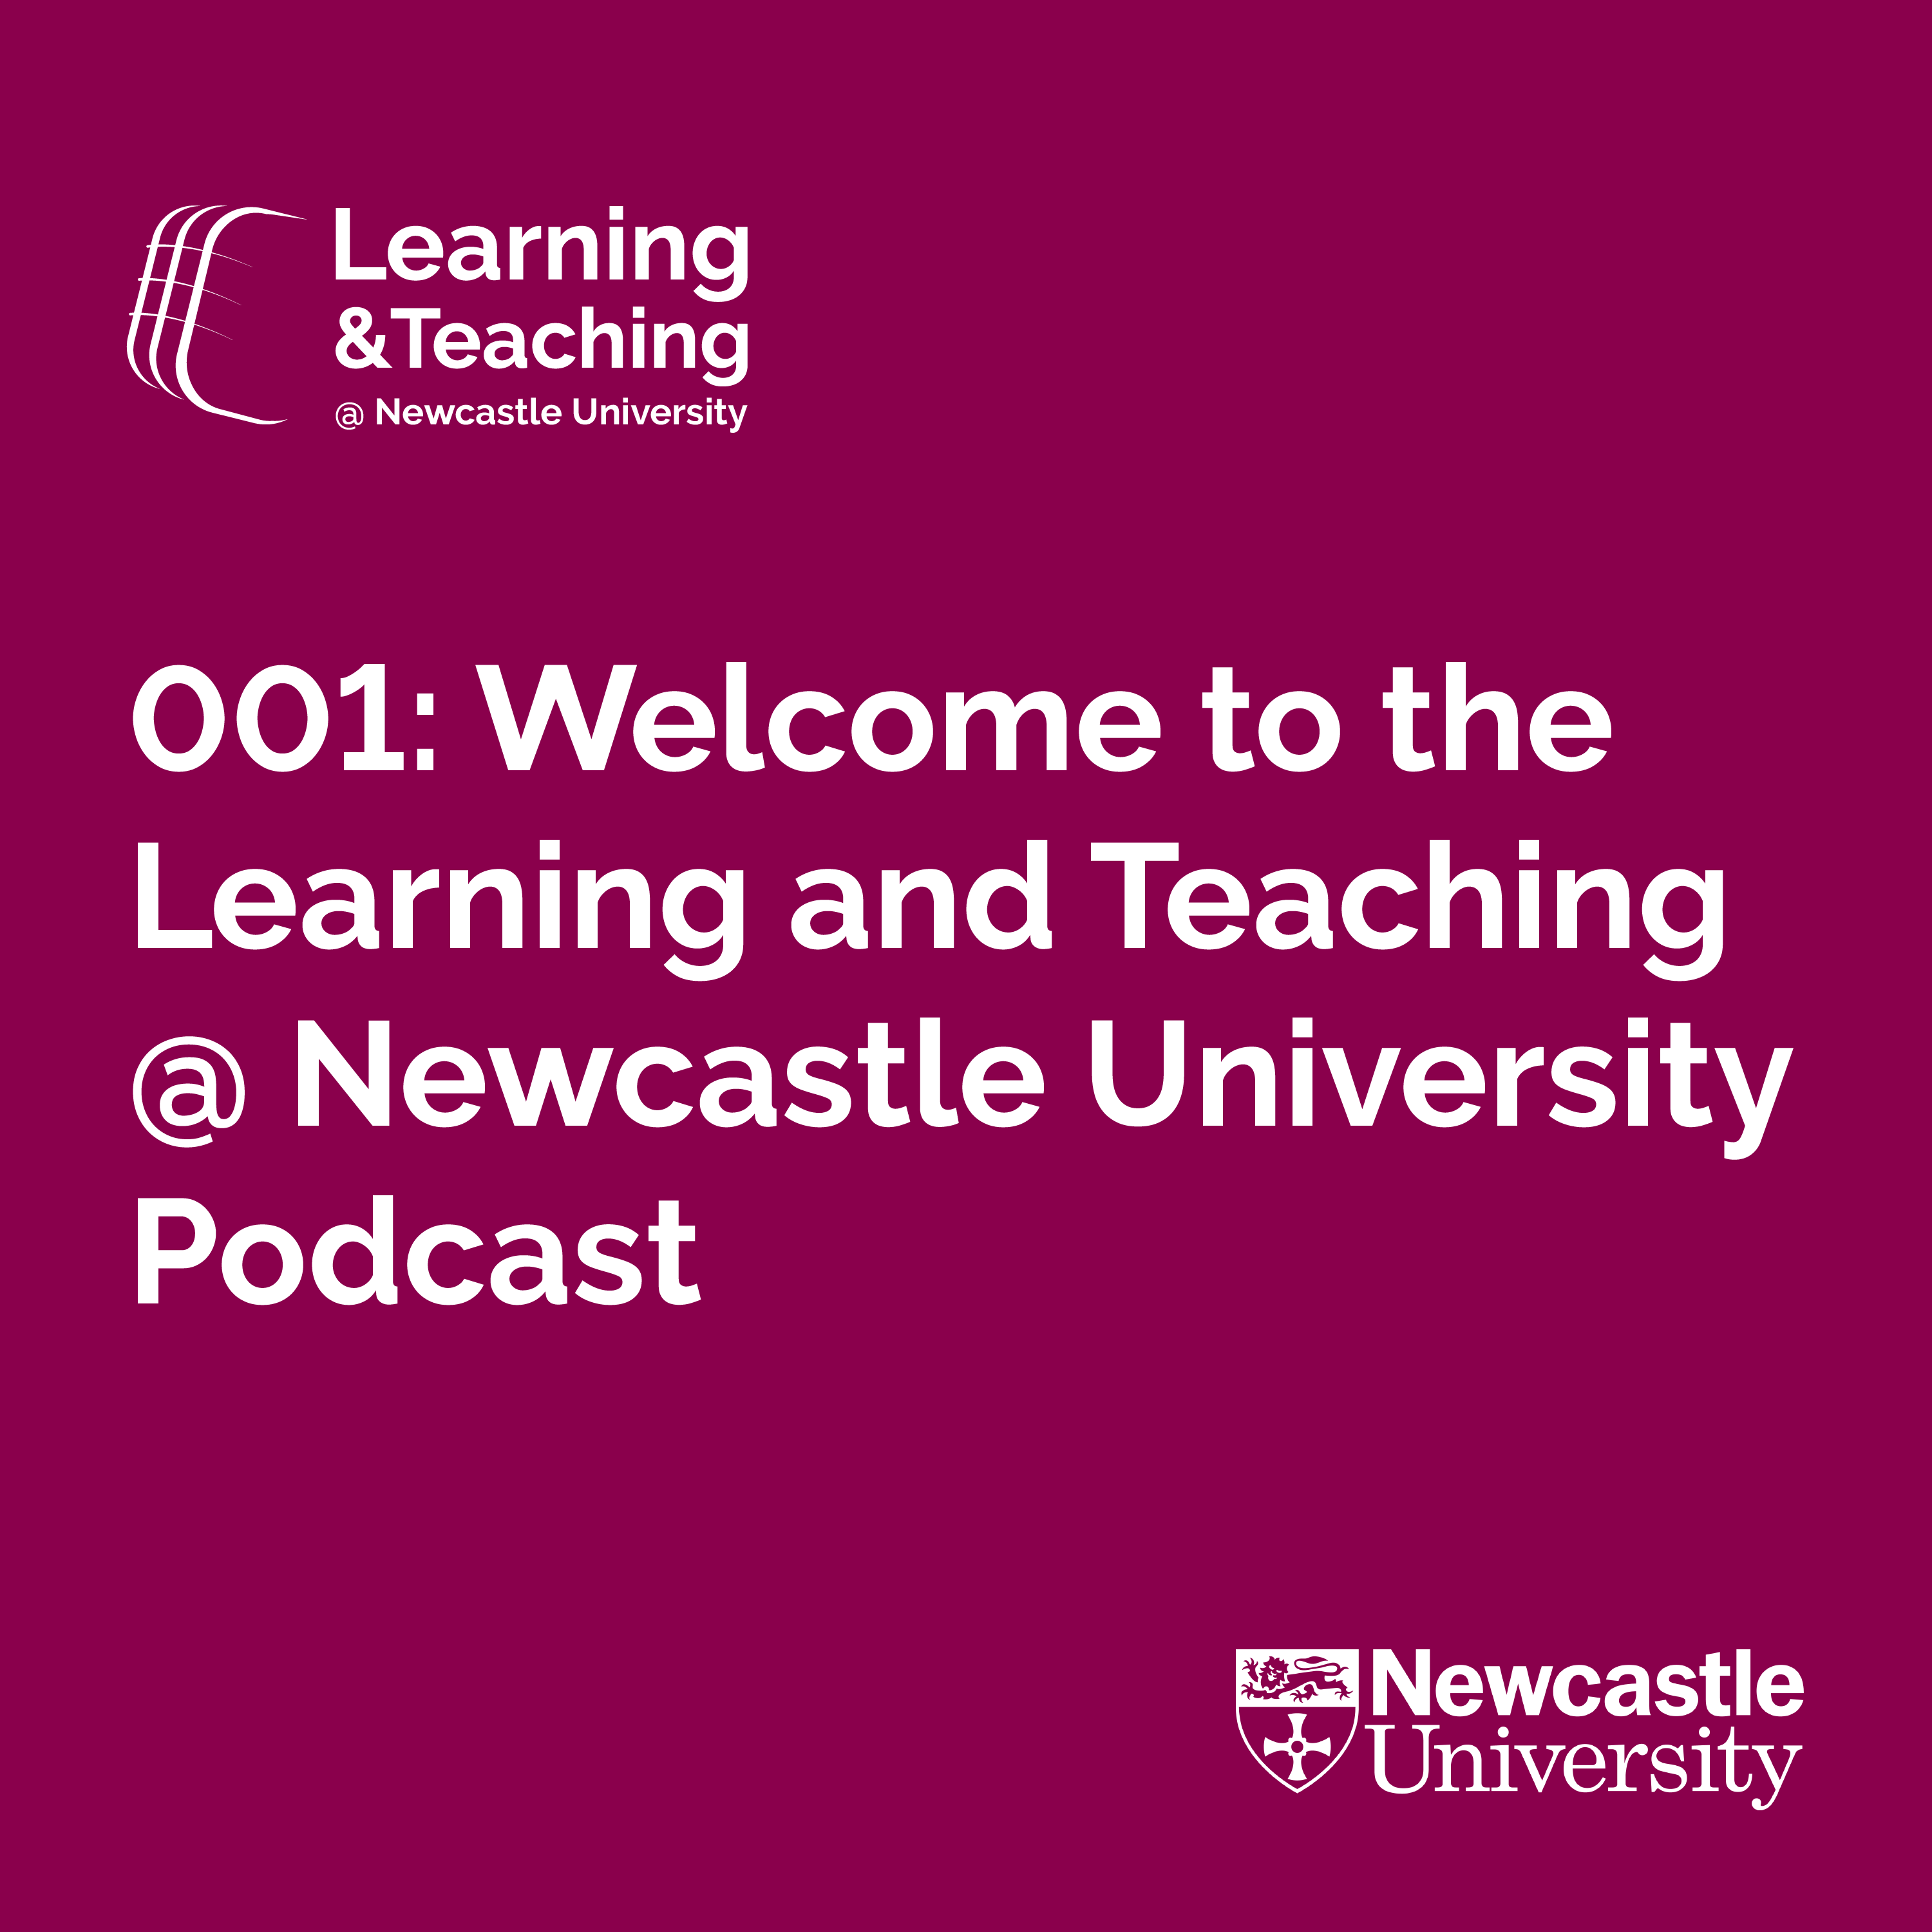 Episode 001: Welcome to the Learning and Teaching at Newcastle University Podcast